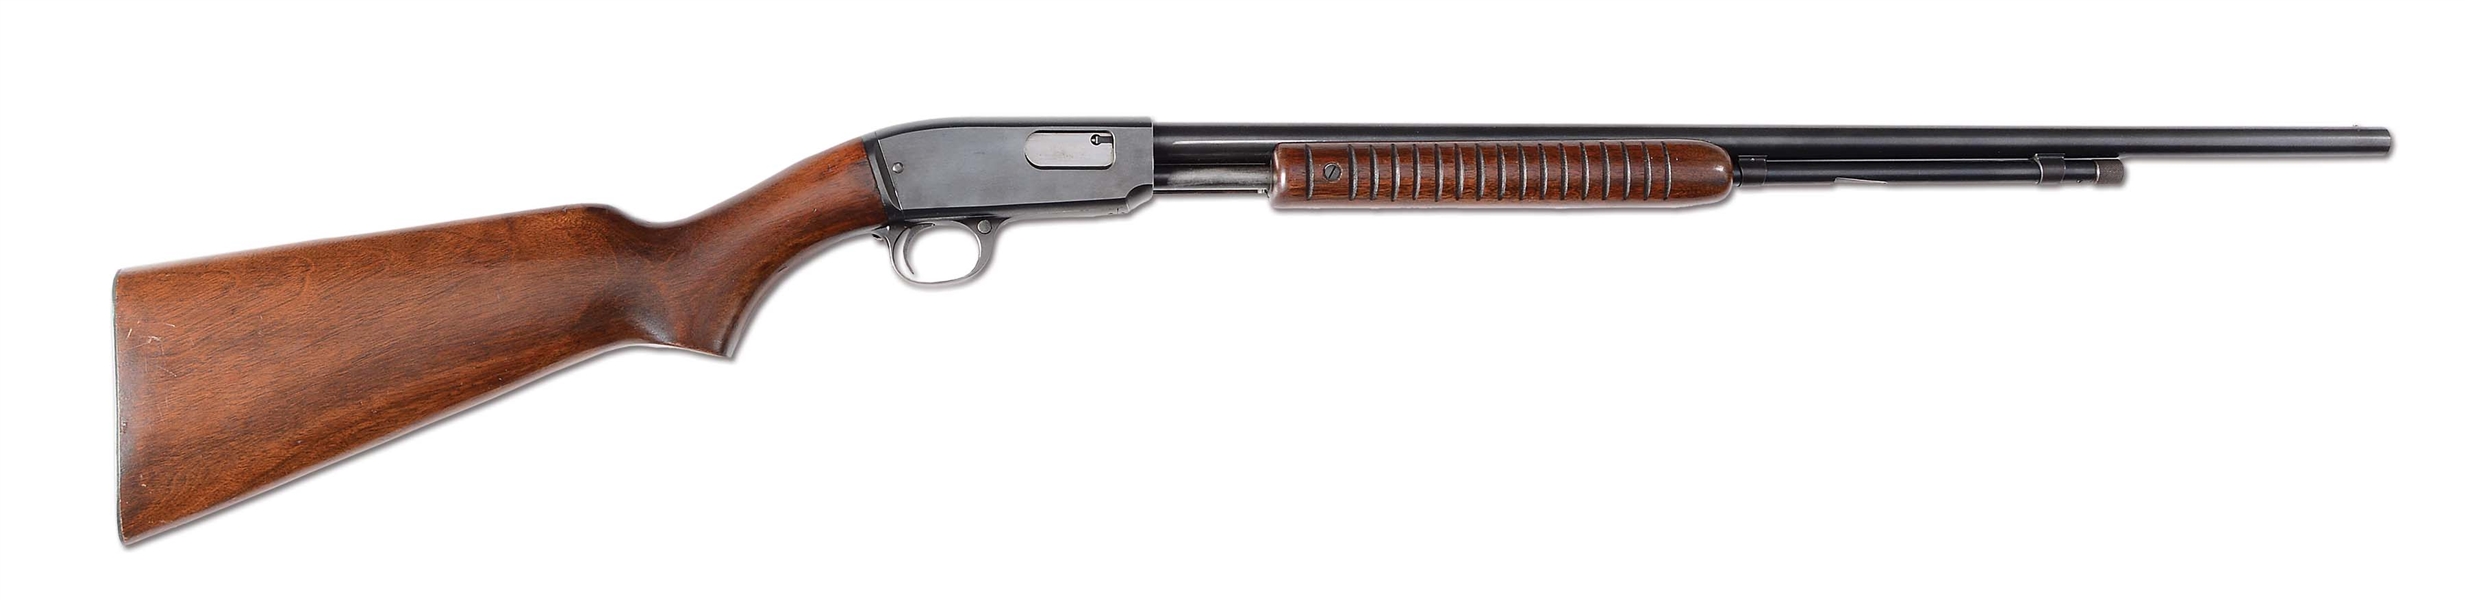 (C) WINCHESTER MODEL 61  "ROUTLEDGE" SMOOTHBORE "SHOT ONLY" PUMP ACTION (1940).